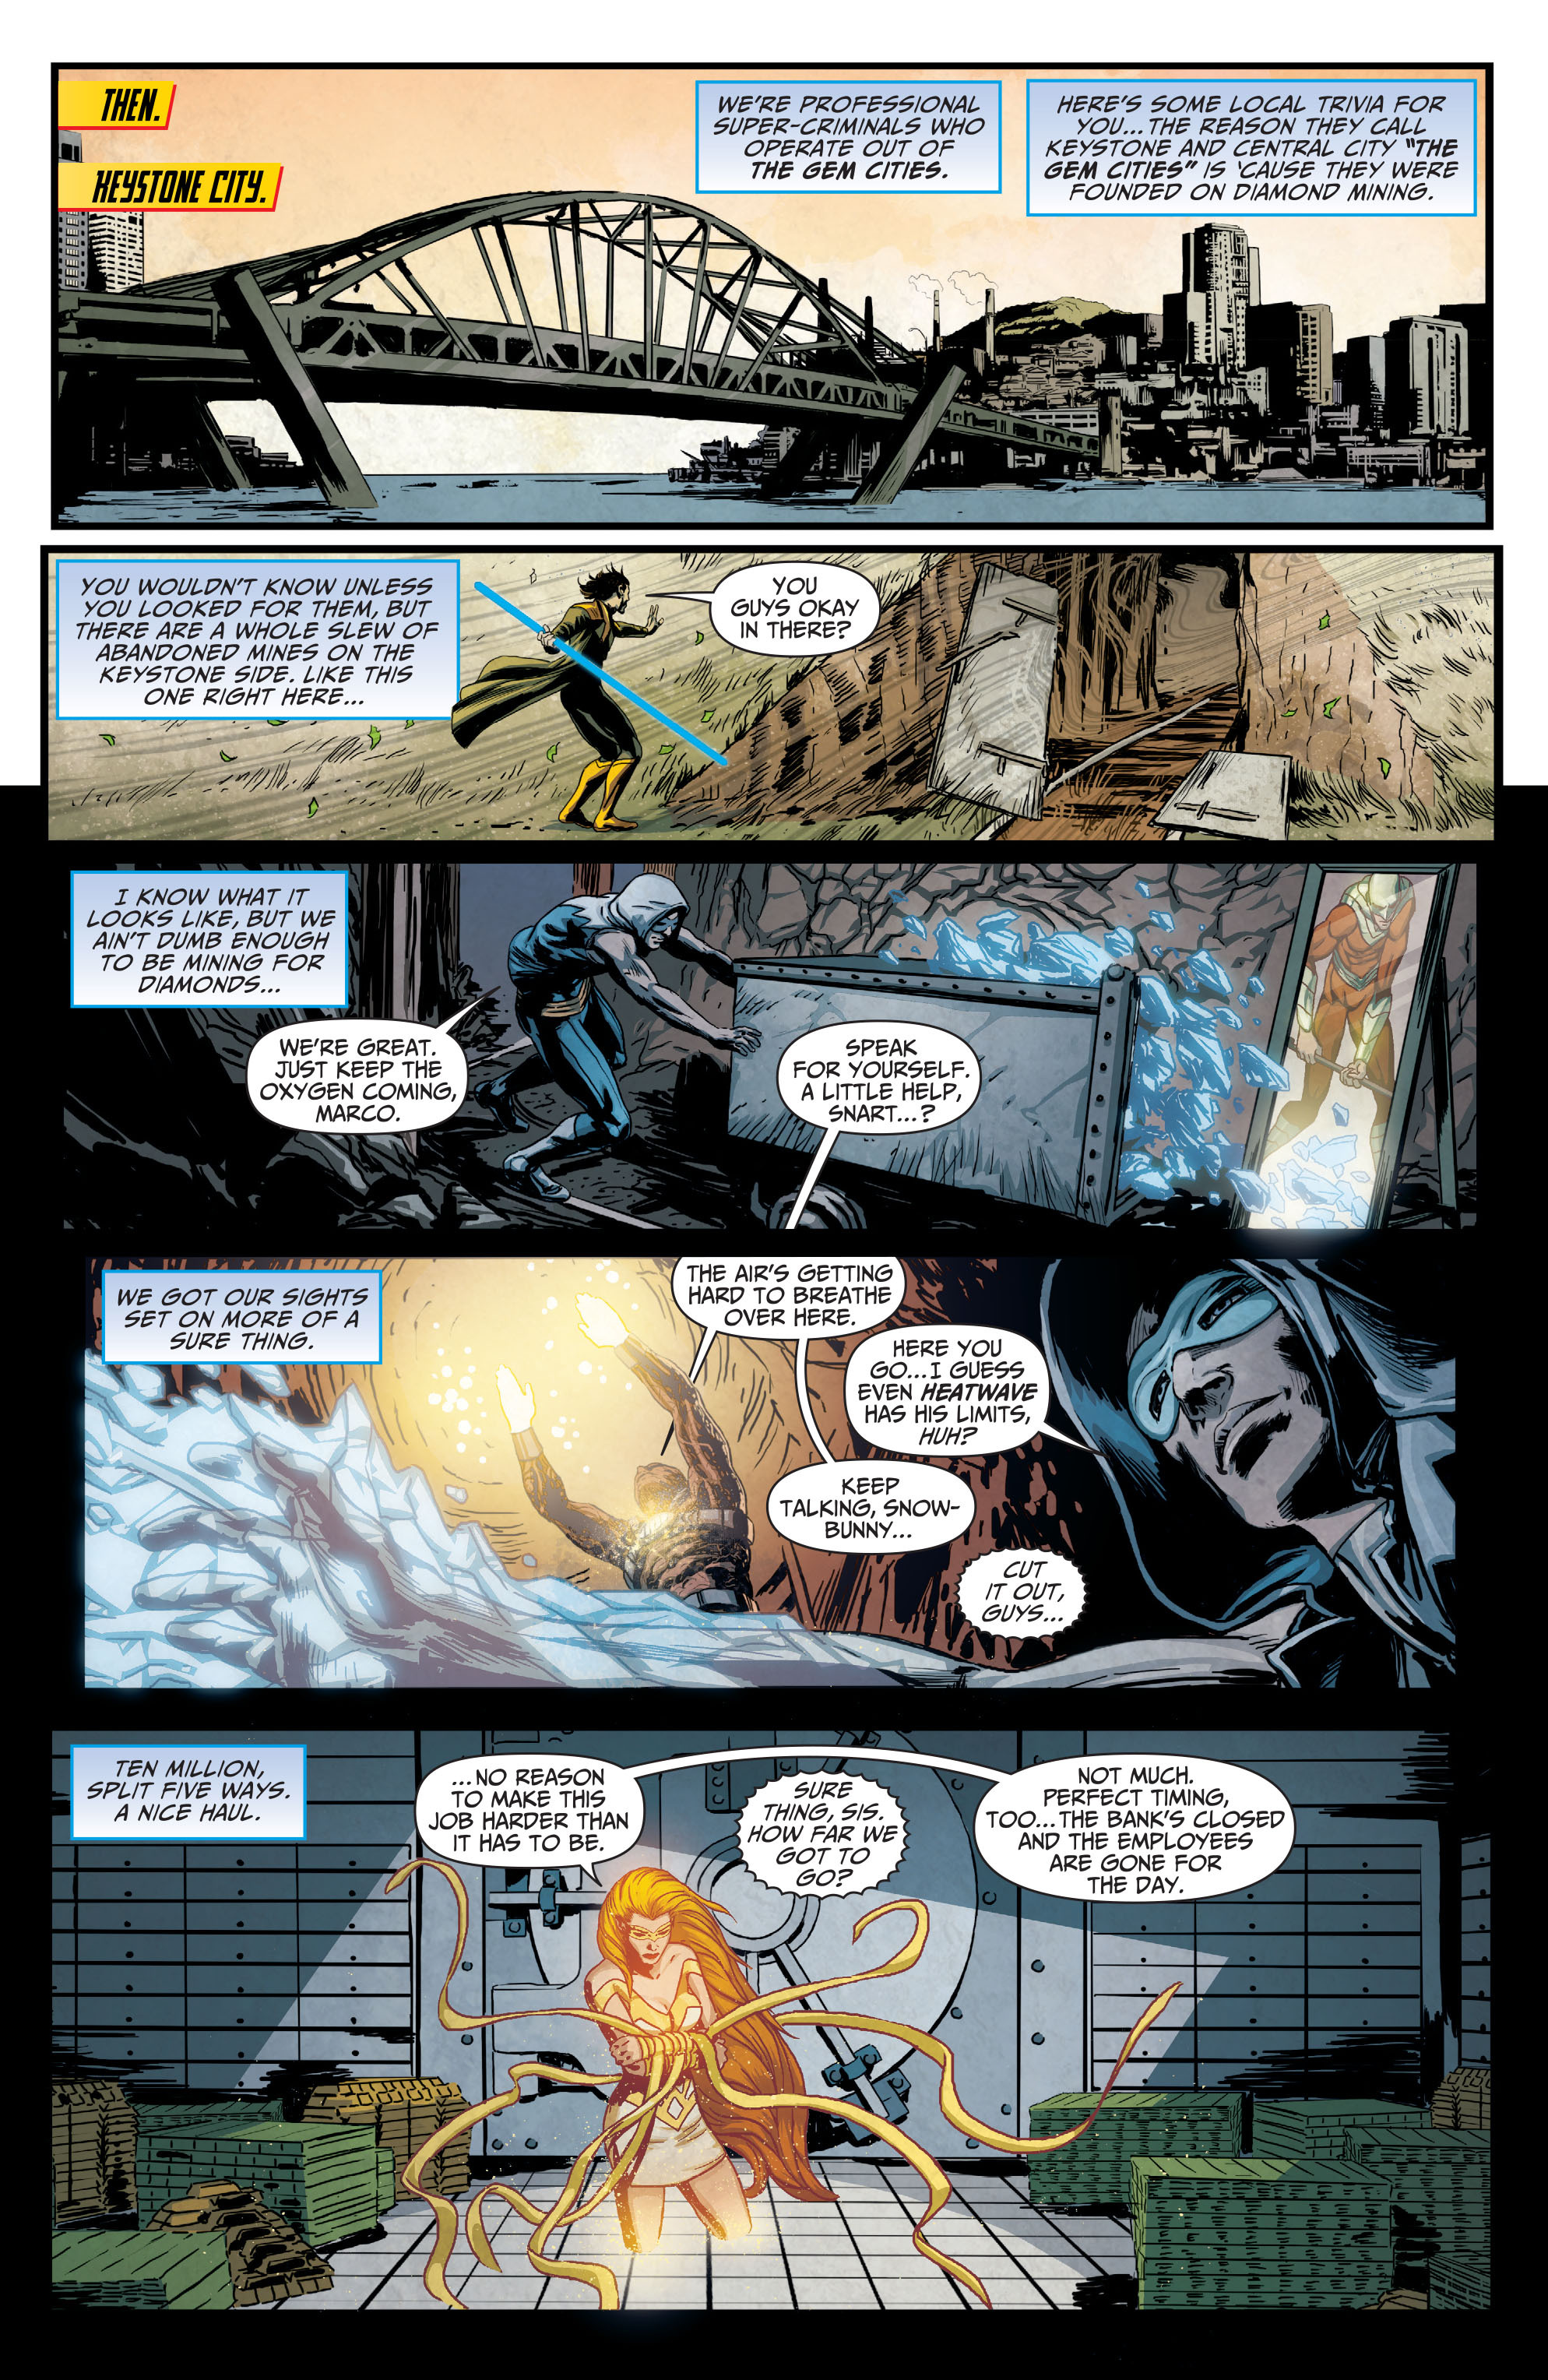 The Flash (2011) issue 23.3 - Page 3